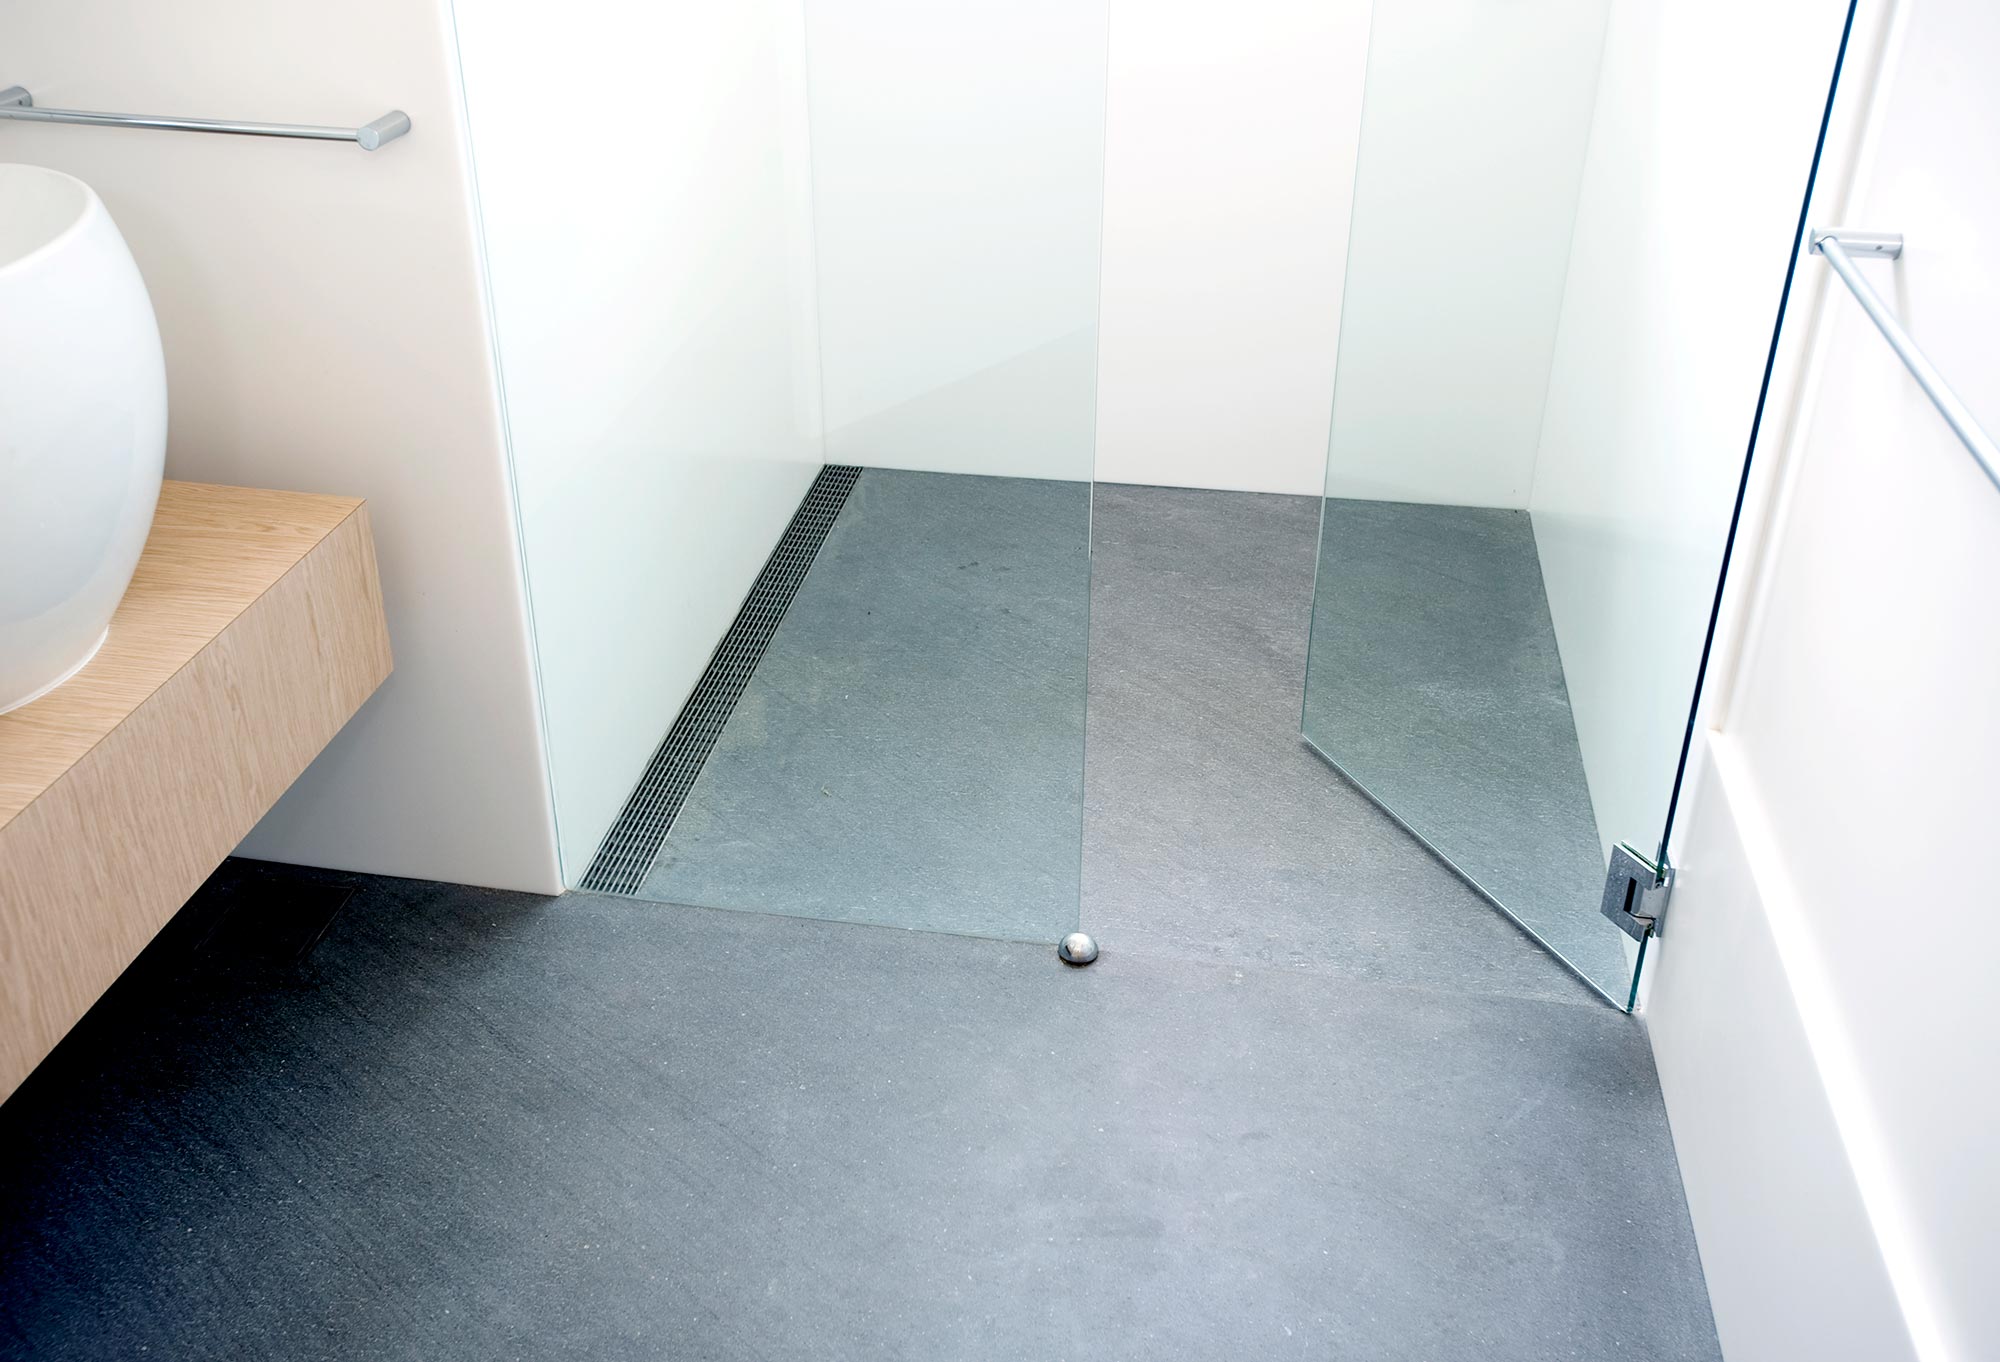 How to Select a Shower Tray for a Wet Room: Factors to Consider